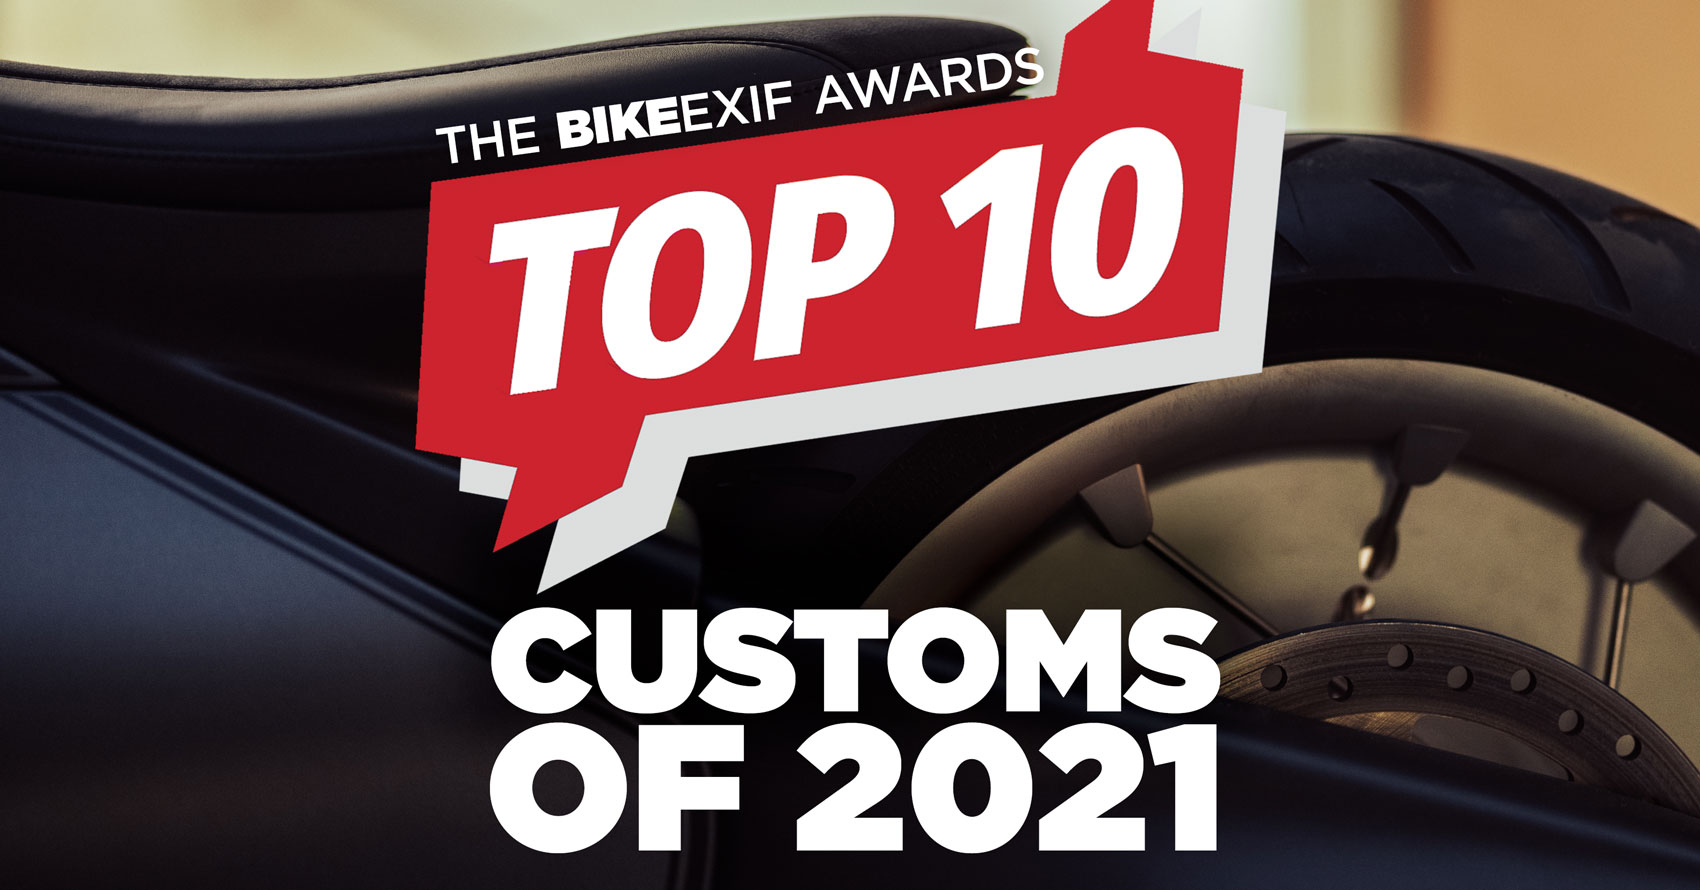 Revealed: The Top 10 Custom Motorcycles of 2021